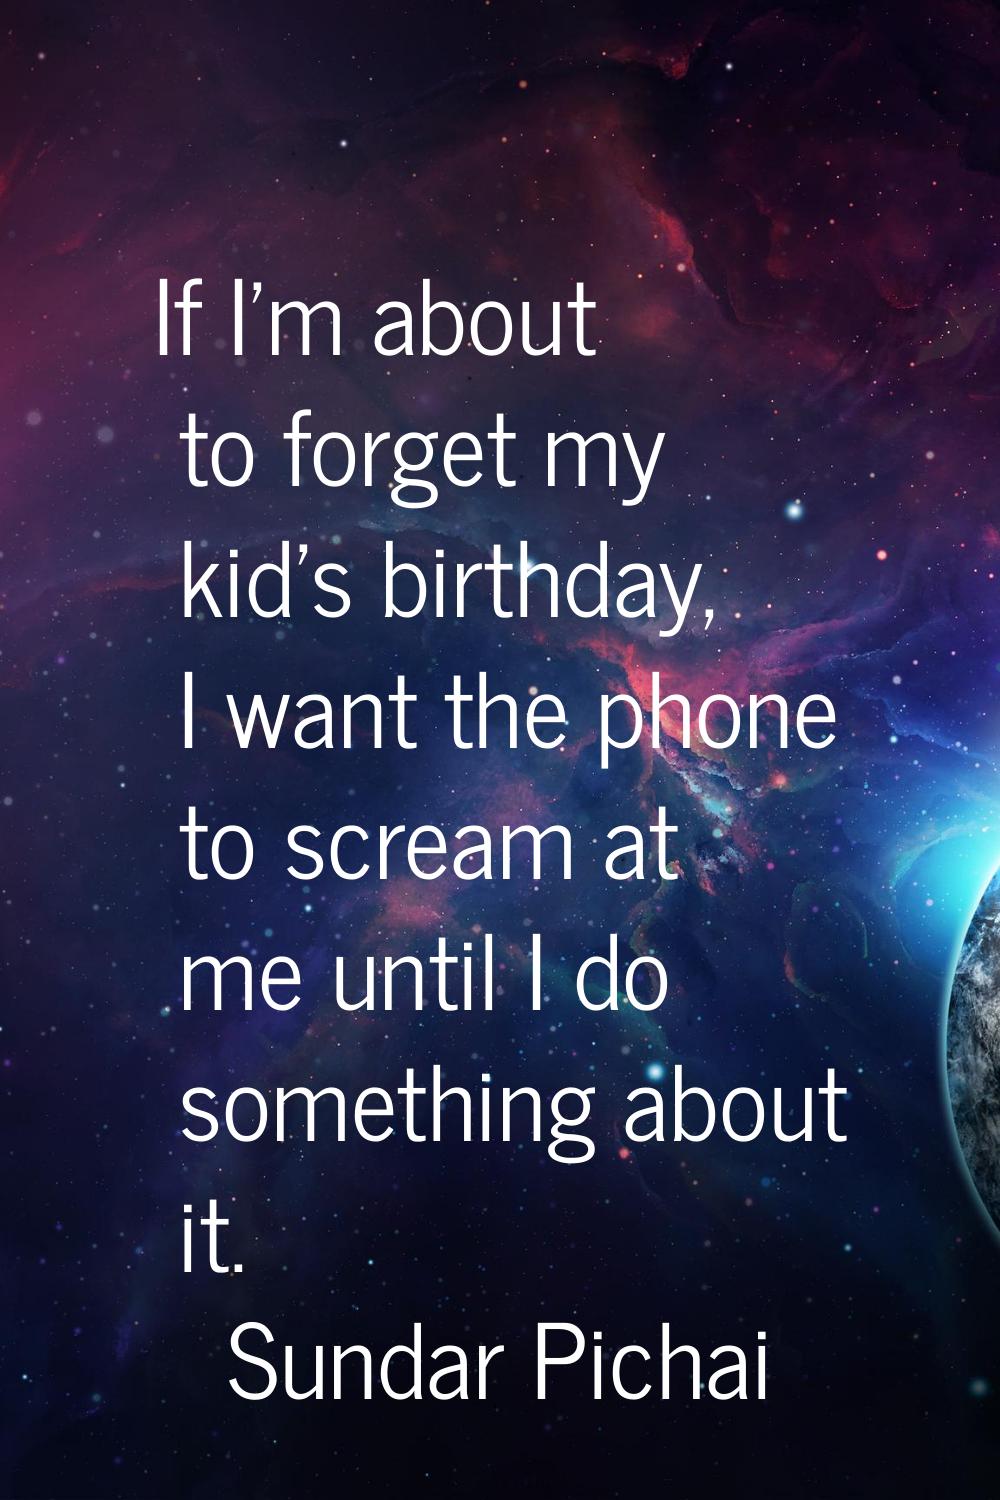 If I'm about to forget my kid's birthday, I want the phone to scream at me until I do something abo